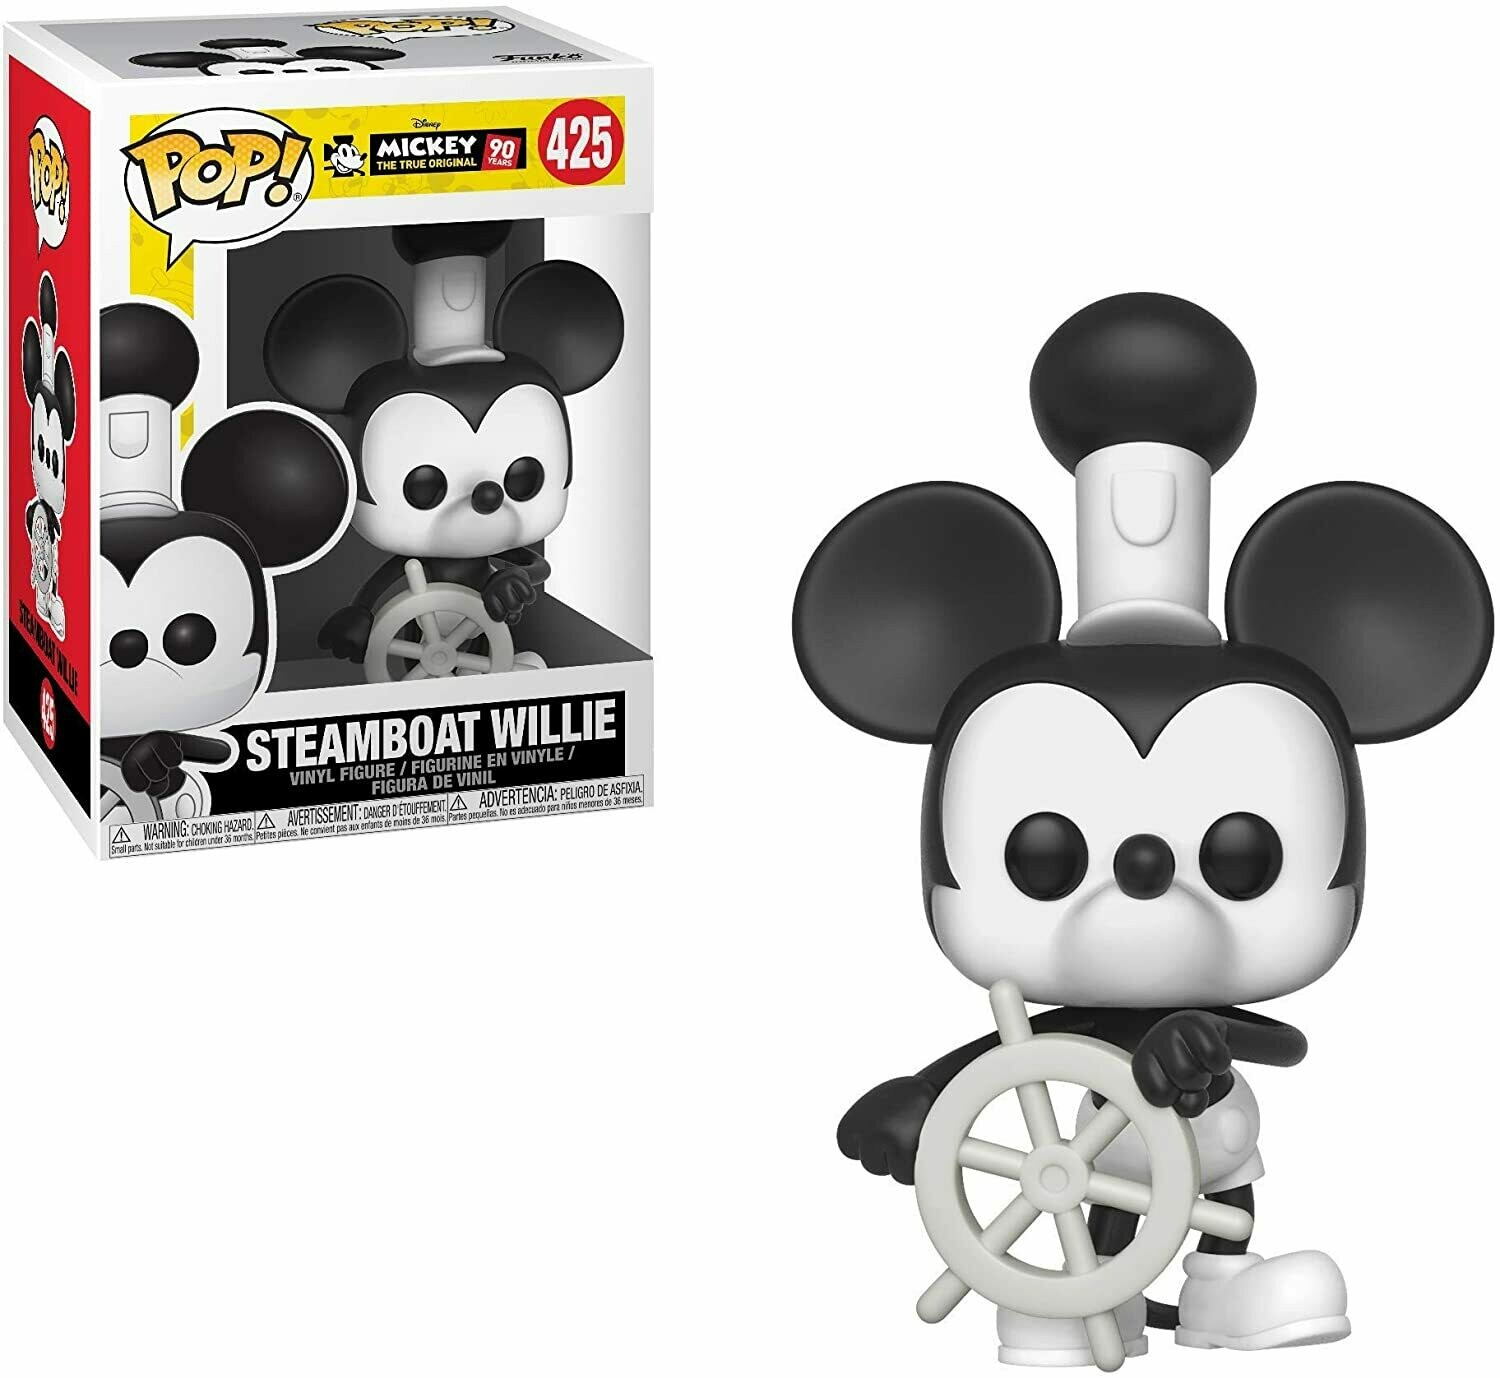 Funko Pop! Steamboat Willie - Mickey Mouse